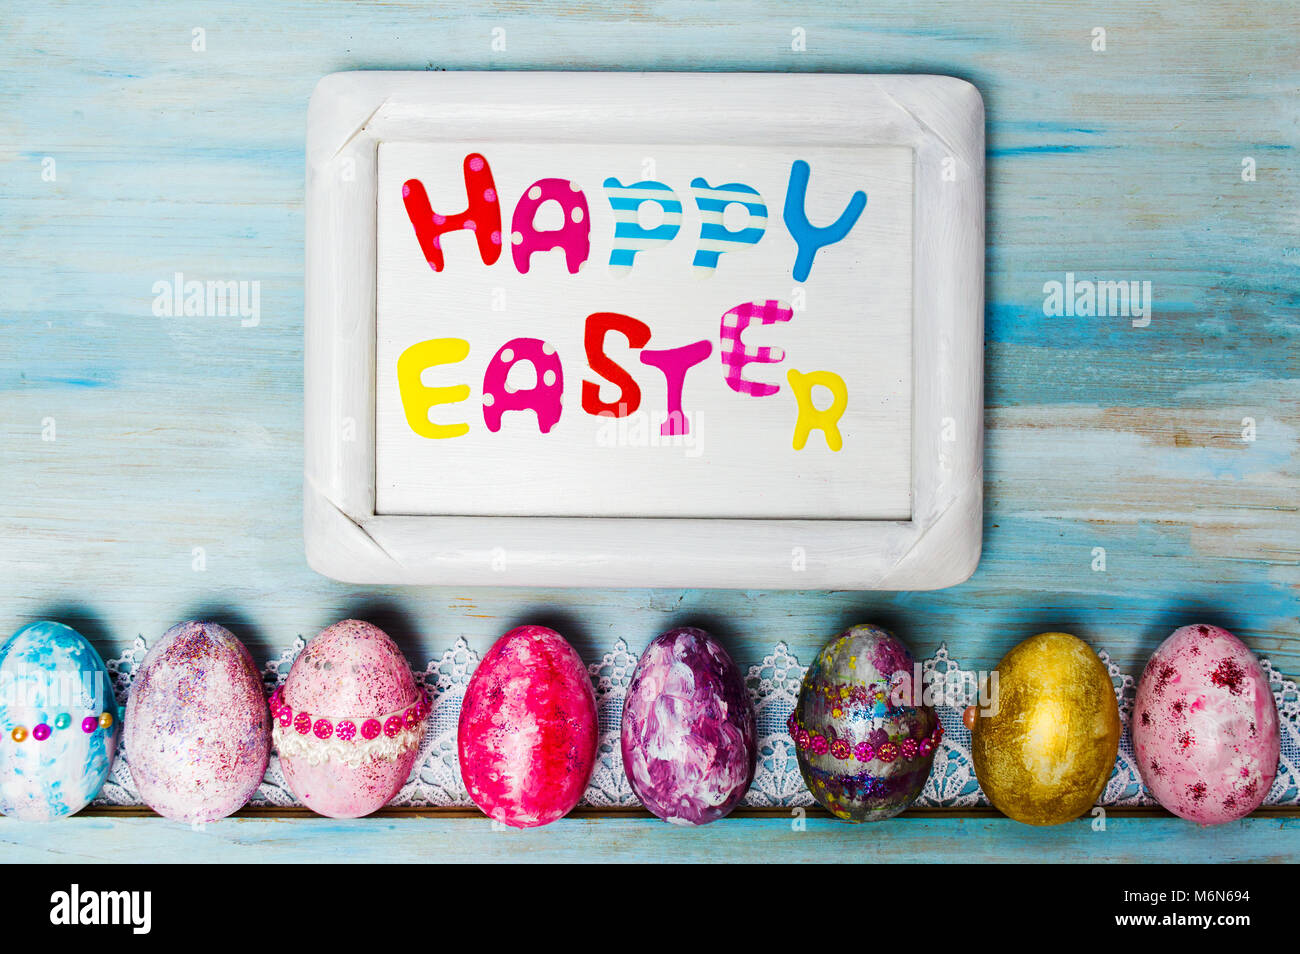 Happy Easter card in a frame with decorated eggs Stock Photo